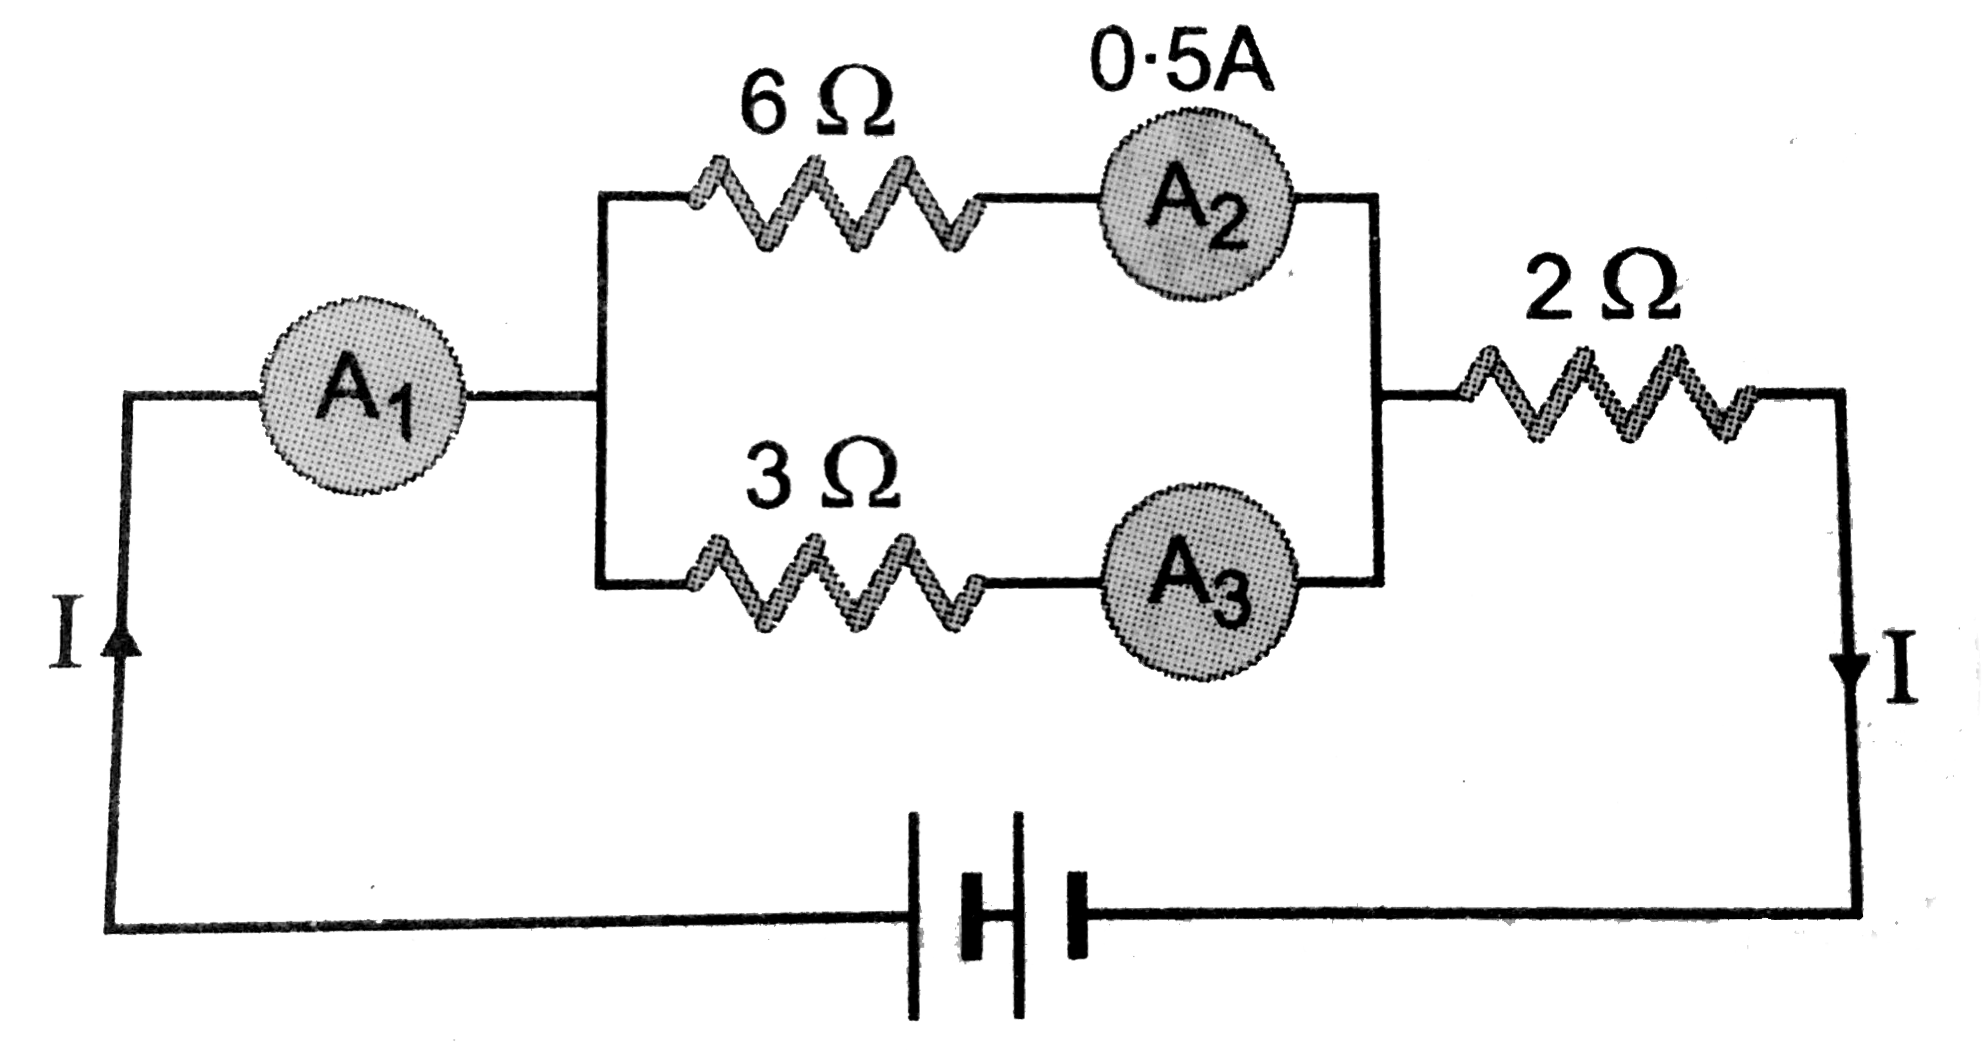 A(1), A(2) and A(3) Are the ammeters and A(2) reads 0.5A. (i) What are the readings of ammeters A(1) and A(3) ? (ii) What is the total resistance of the circuit ?